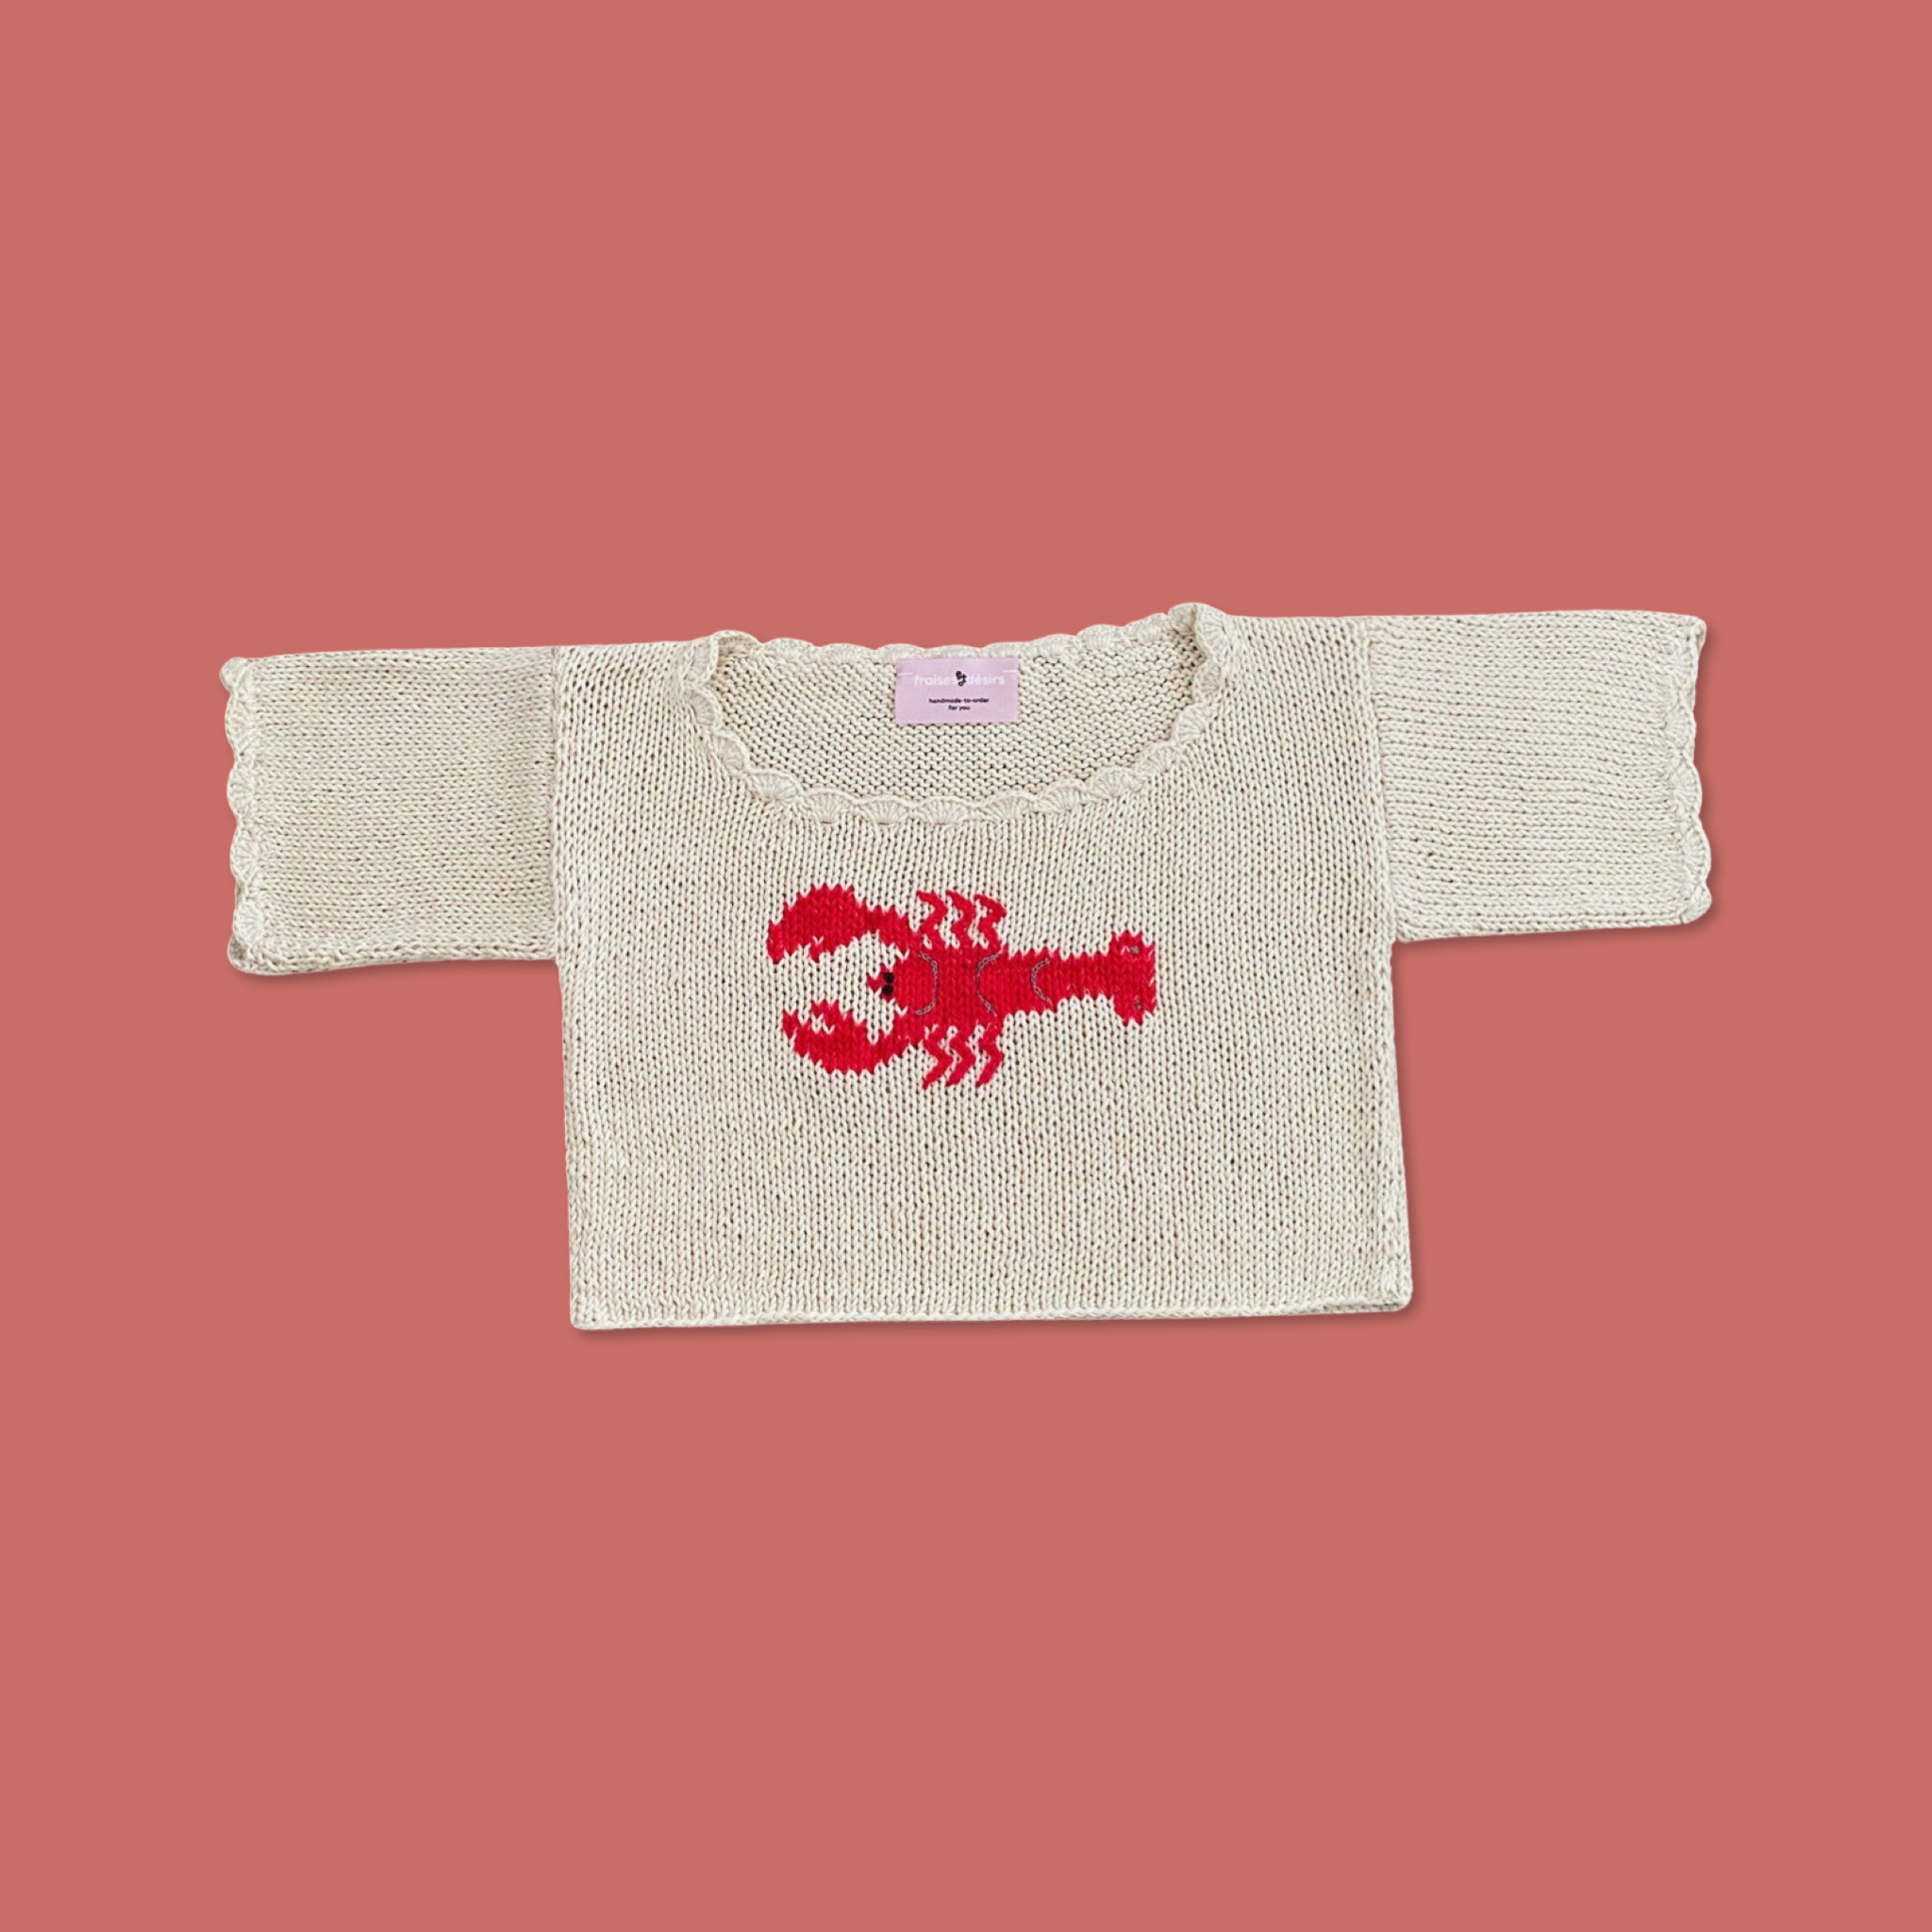 The Lobster top